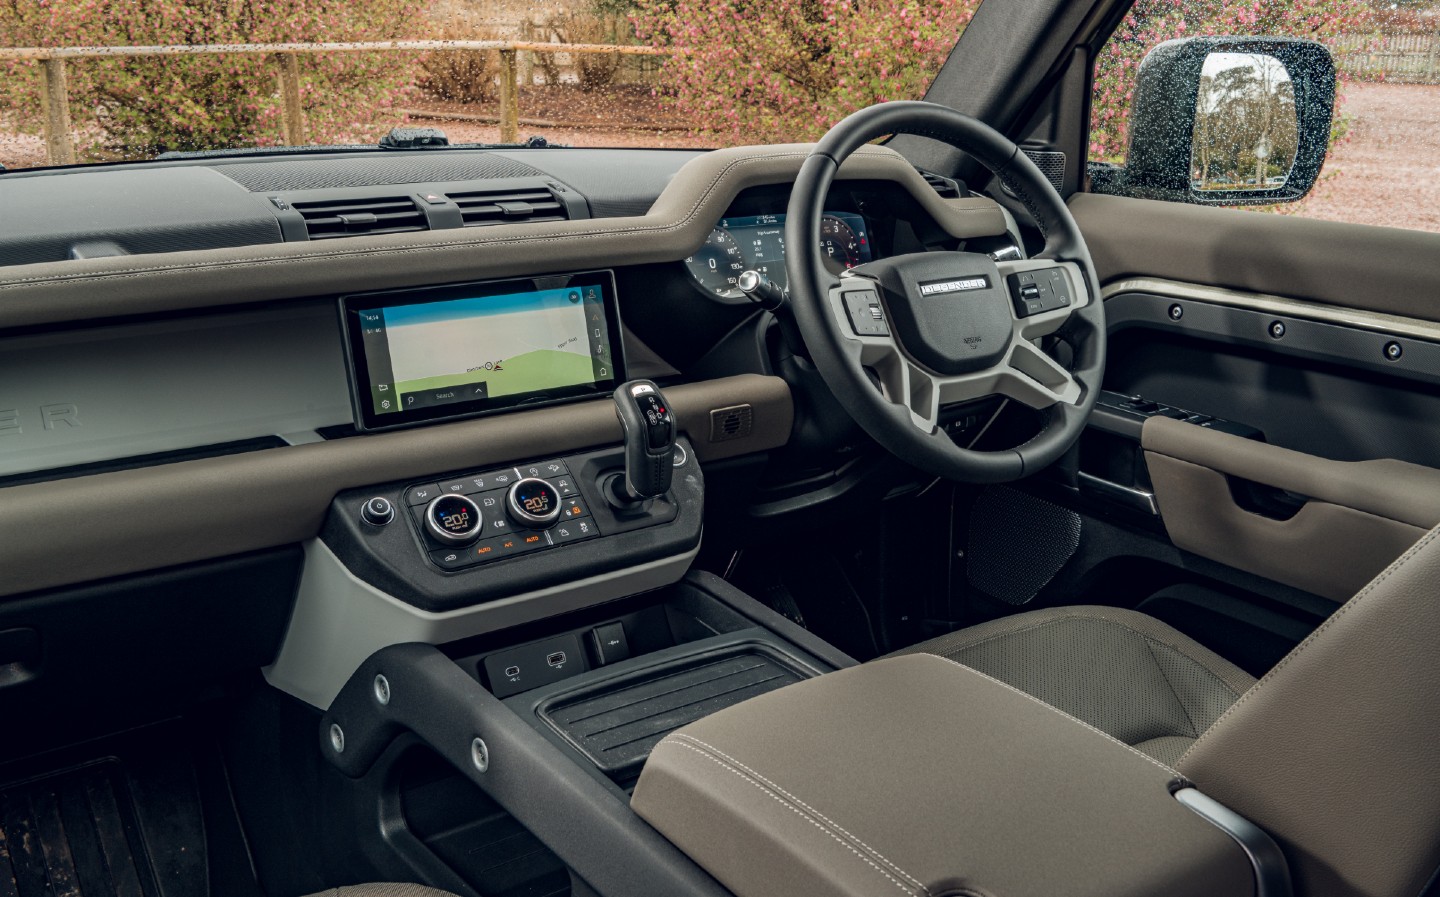 Interior - 2020 Land Rover Defender review by Will Dron for Sunday Times Driving.co.uk